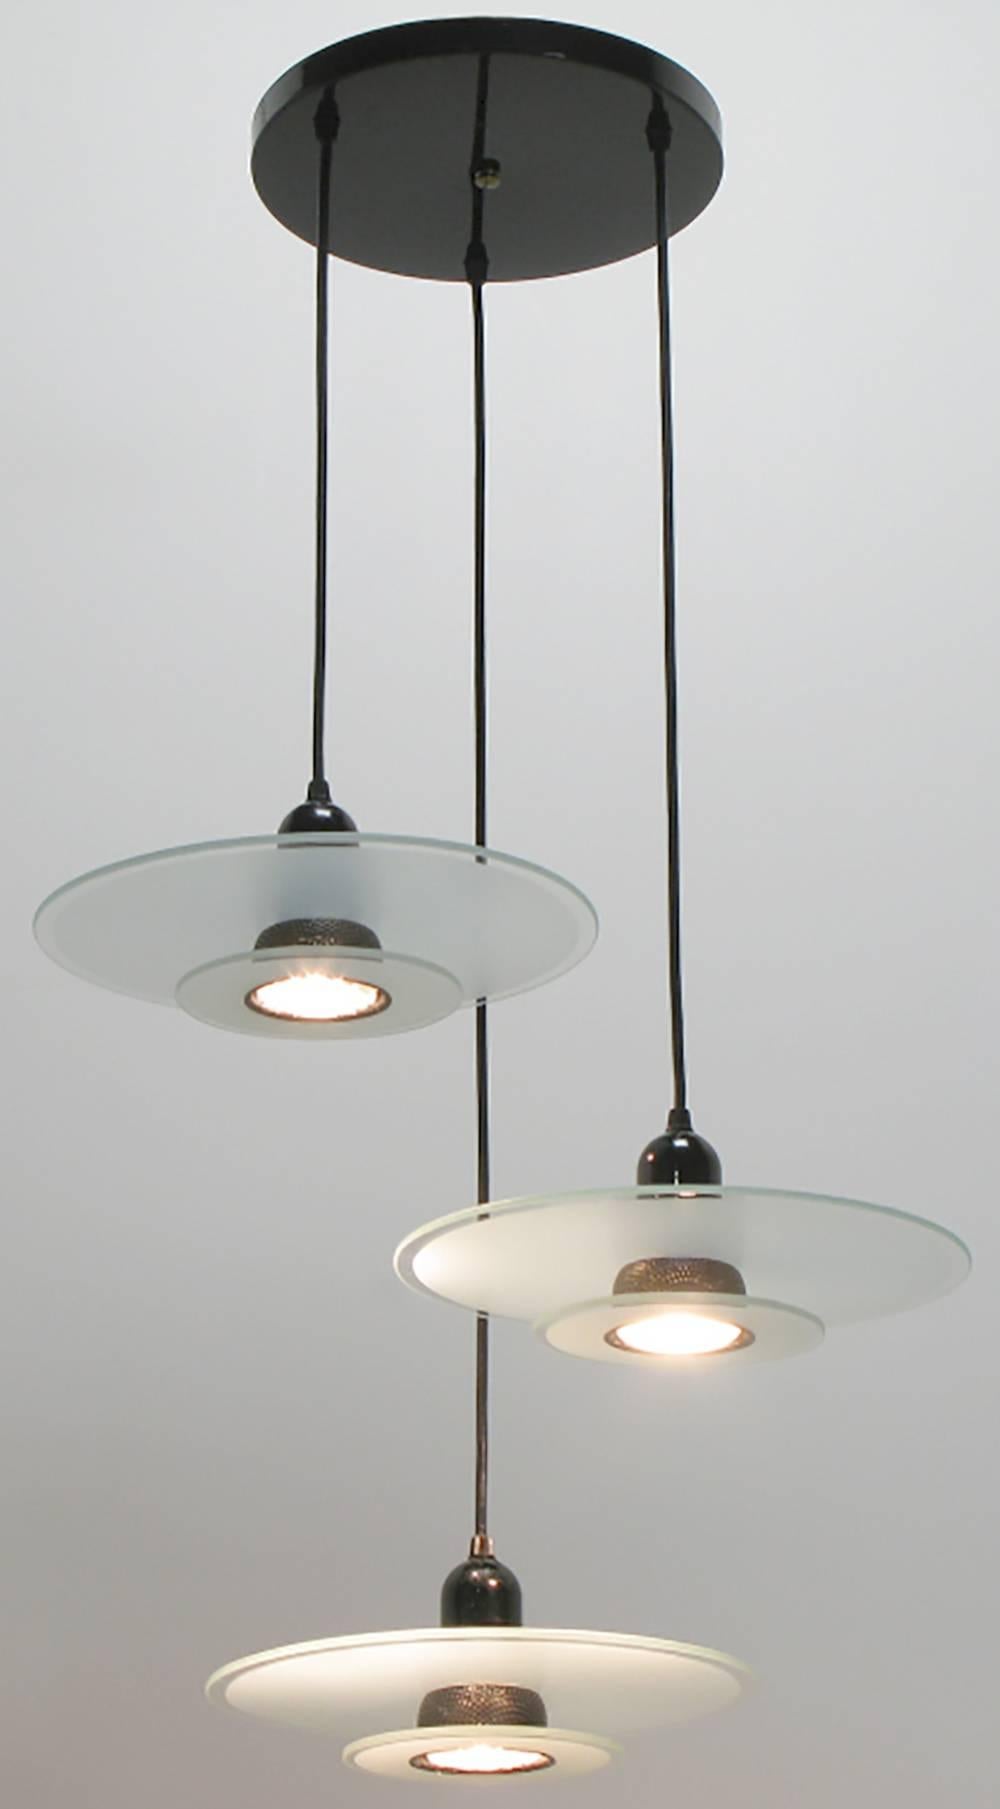 Art Deco revival three-light pendant fixture with etched and clear two part glass disc shades. Black enamel steel bullet housing is pierced between the 1st and second glass discs. Black wrapped lighting cable suspends each fixture from the black